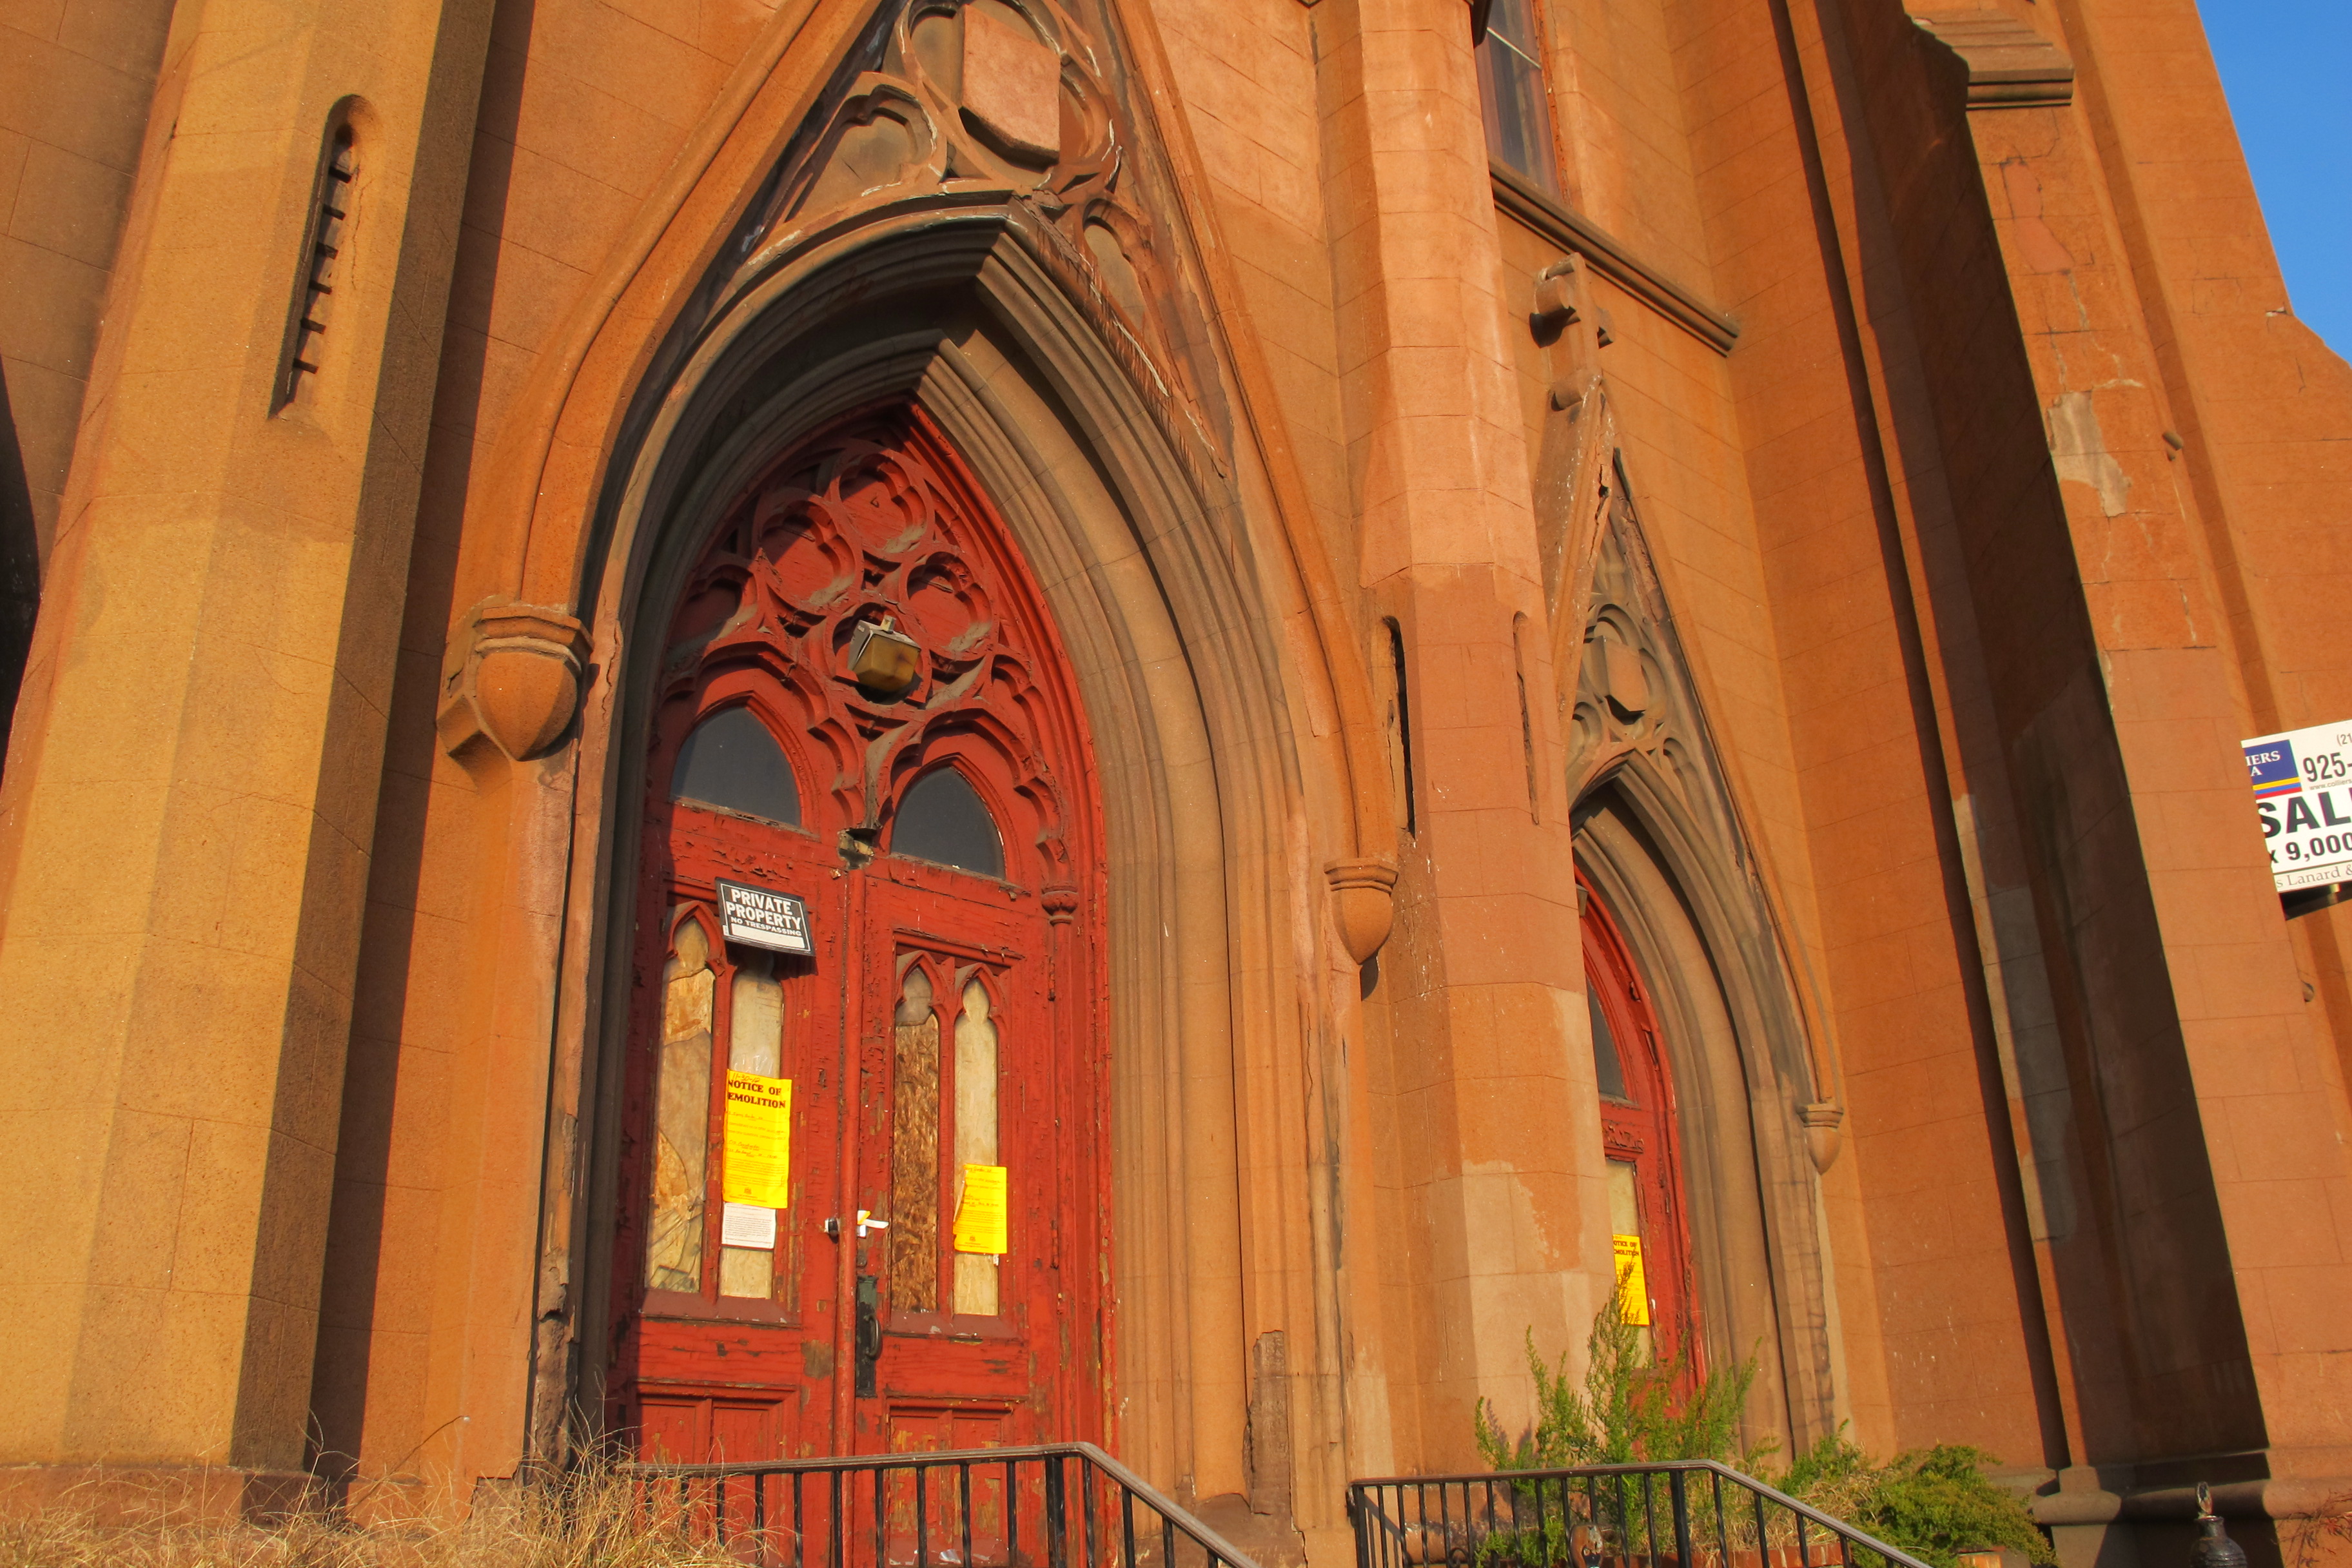 The Church of the Assumption's doors on Spring Garden Street were posted with demolition notices.